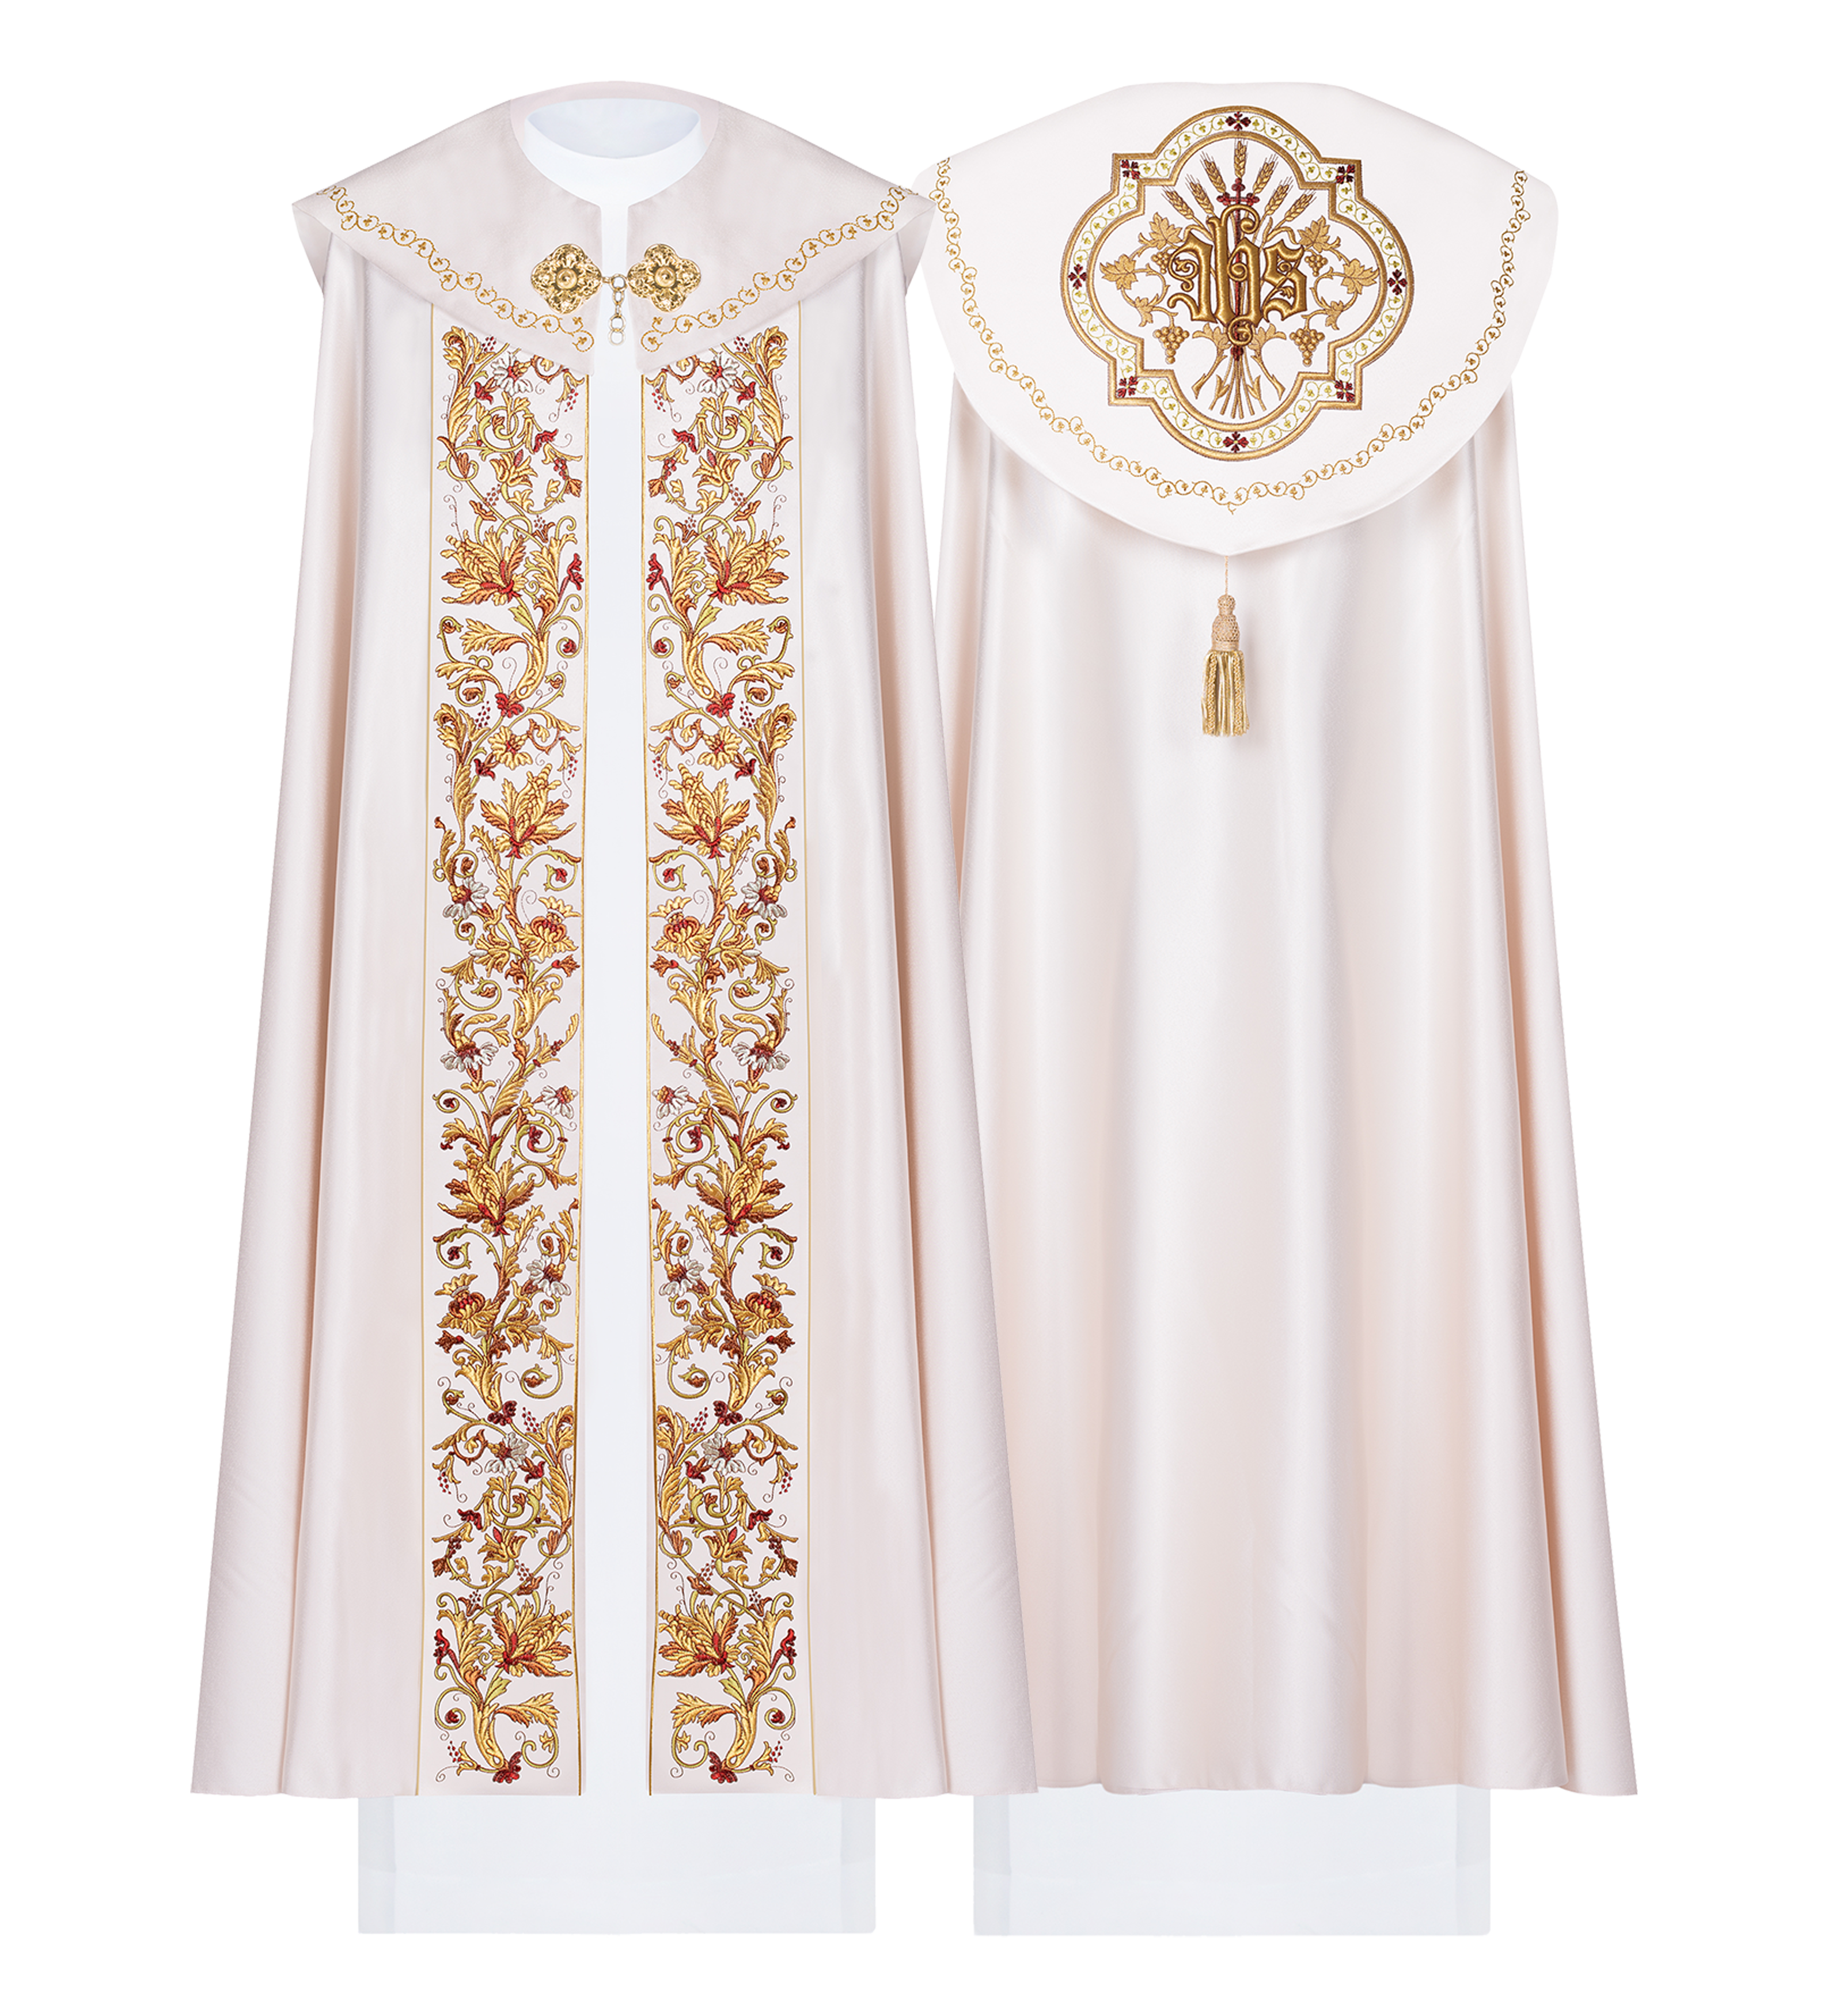 Satin ecru liturgical cape with embroidered gold IHS